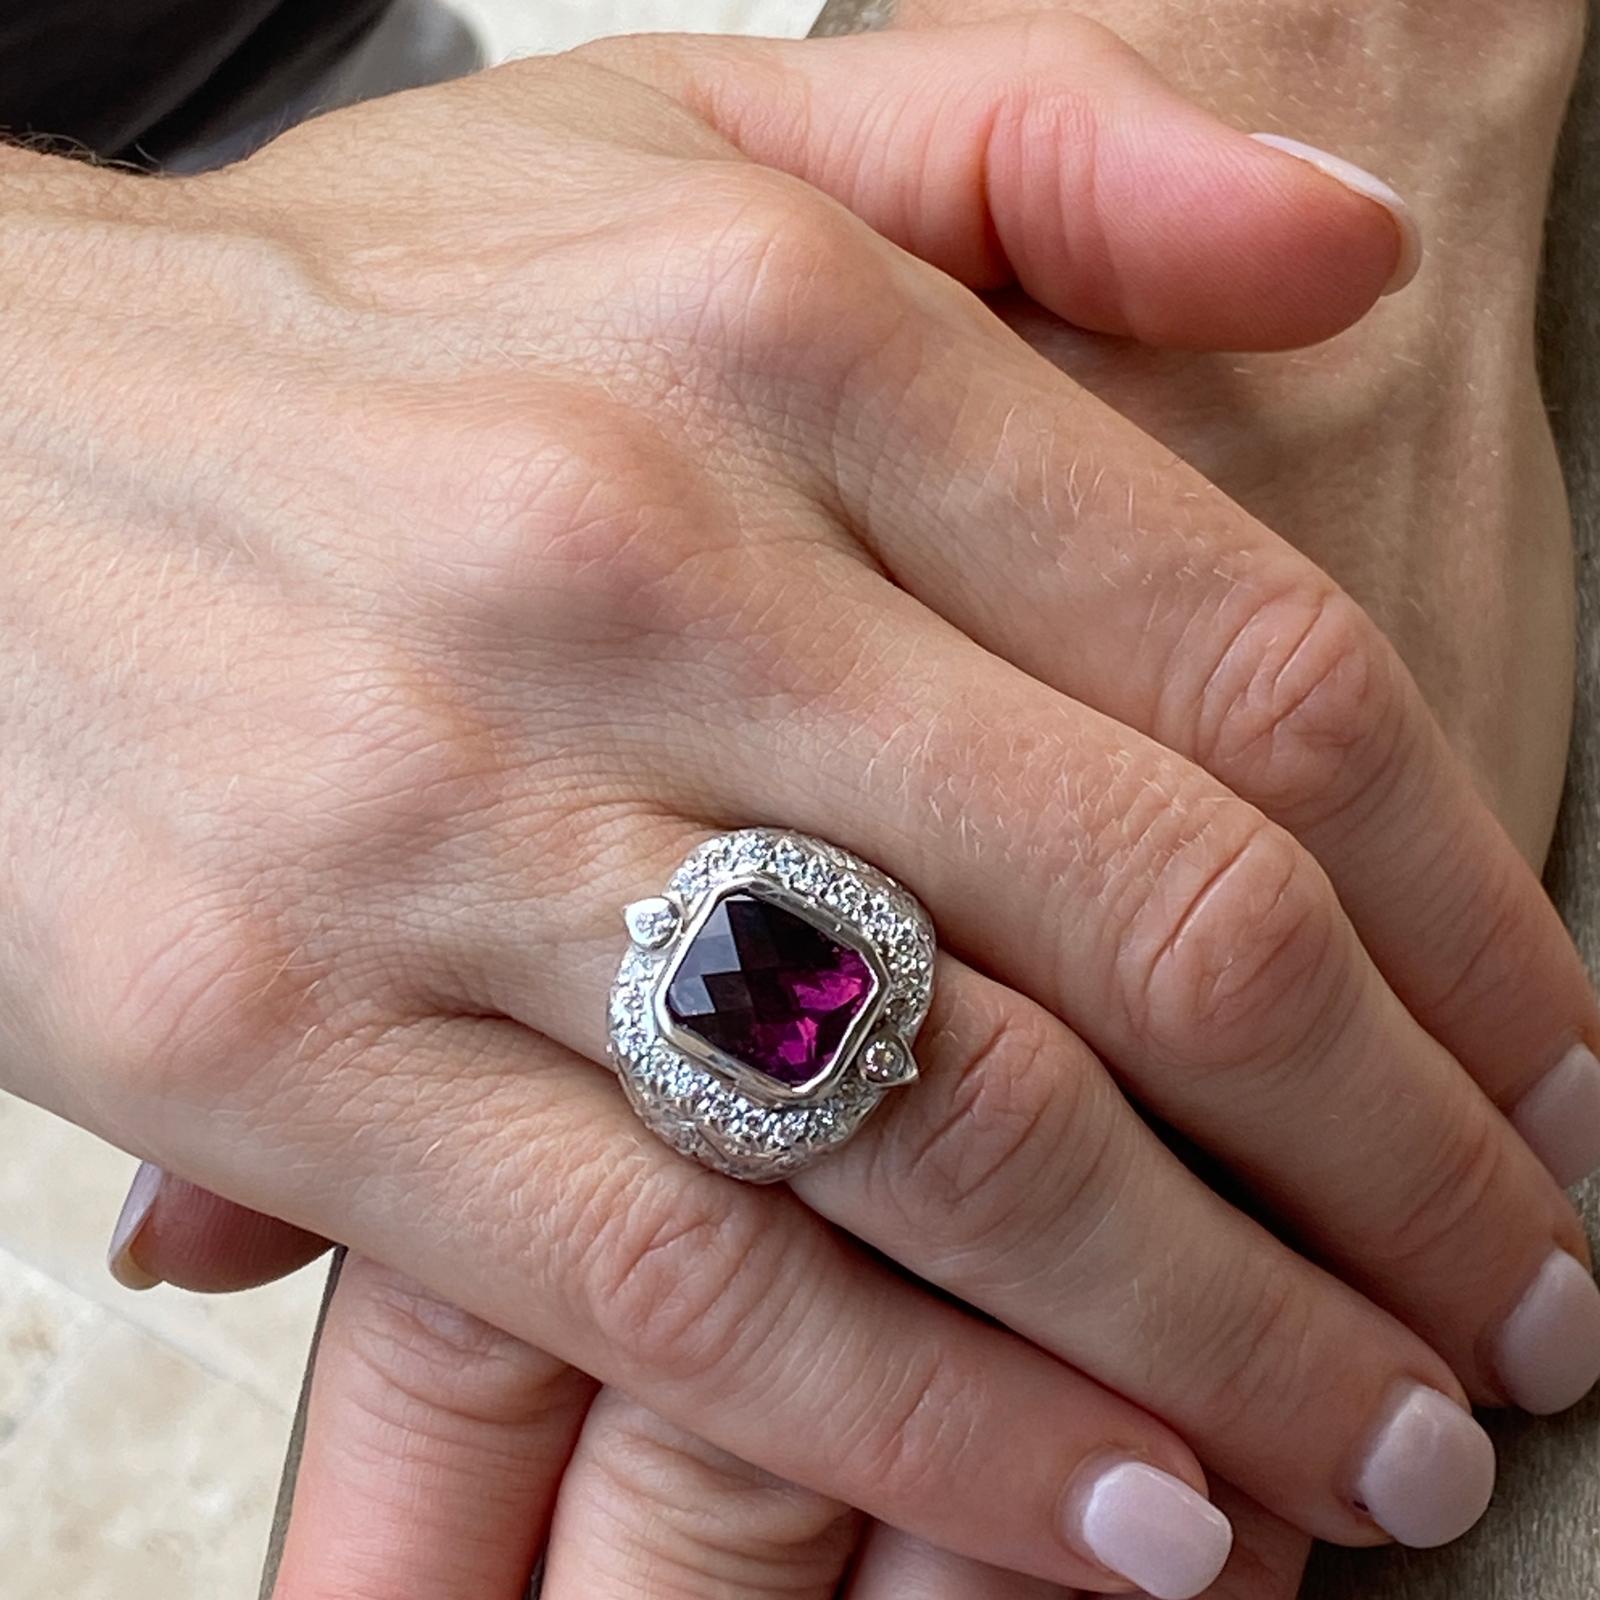 Beautiful rubelite and diamond ring by designer Elizabeth Gage fashioned in 18 karat white gold. The approximately 5.50 carat cushion shape diagonal checkerboard faceted rubelite gemstone is bezel set and surrounded by 34 round brilliant cut